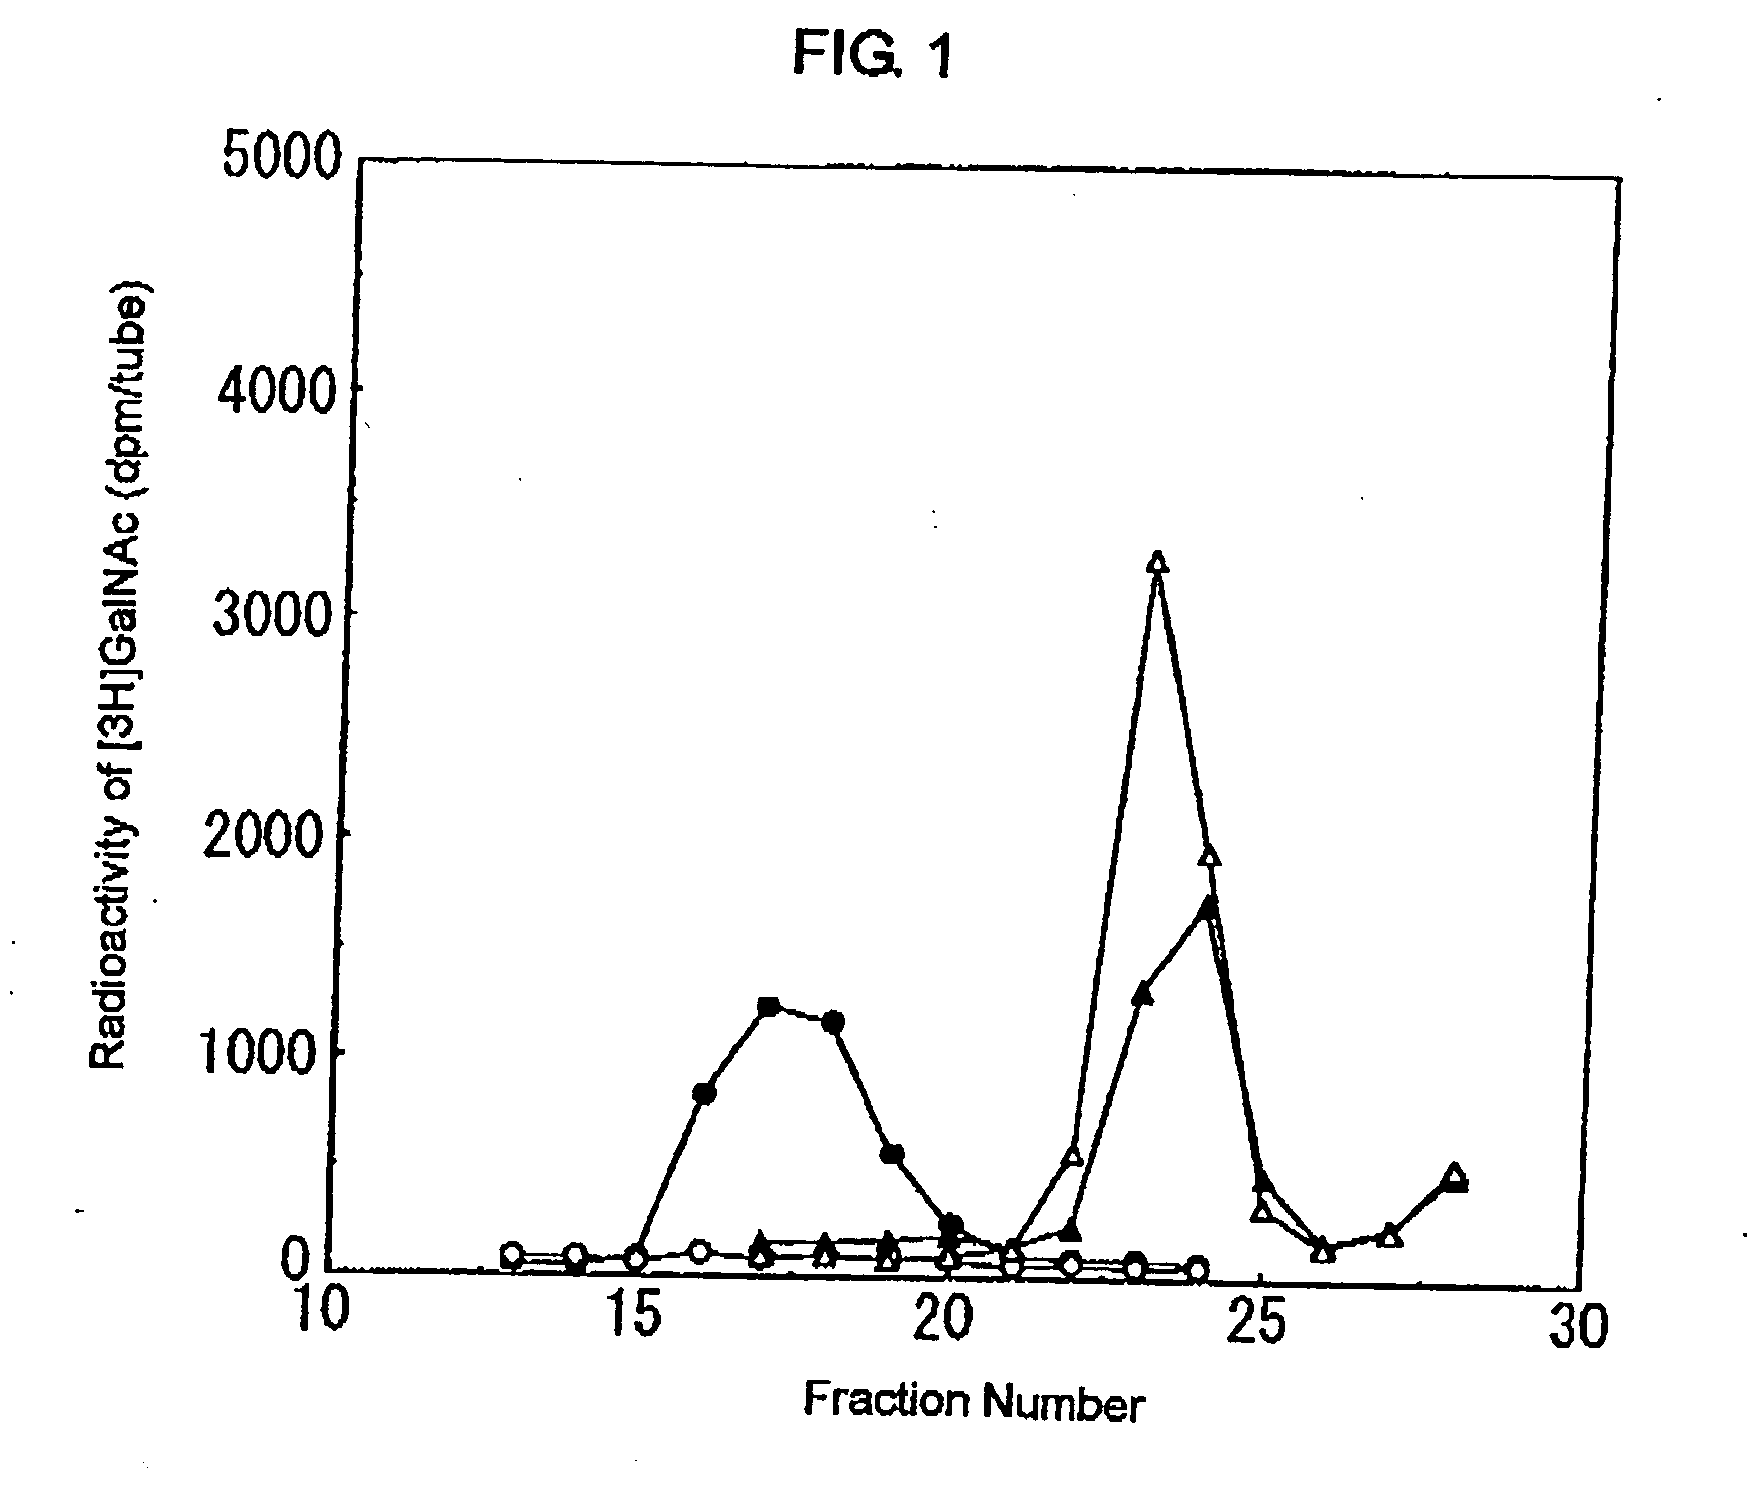 Chondroitin systhetase and nucleic acid coding for the enzyme